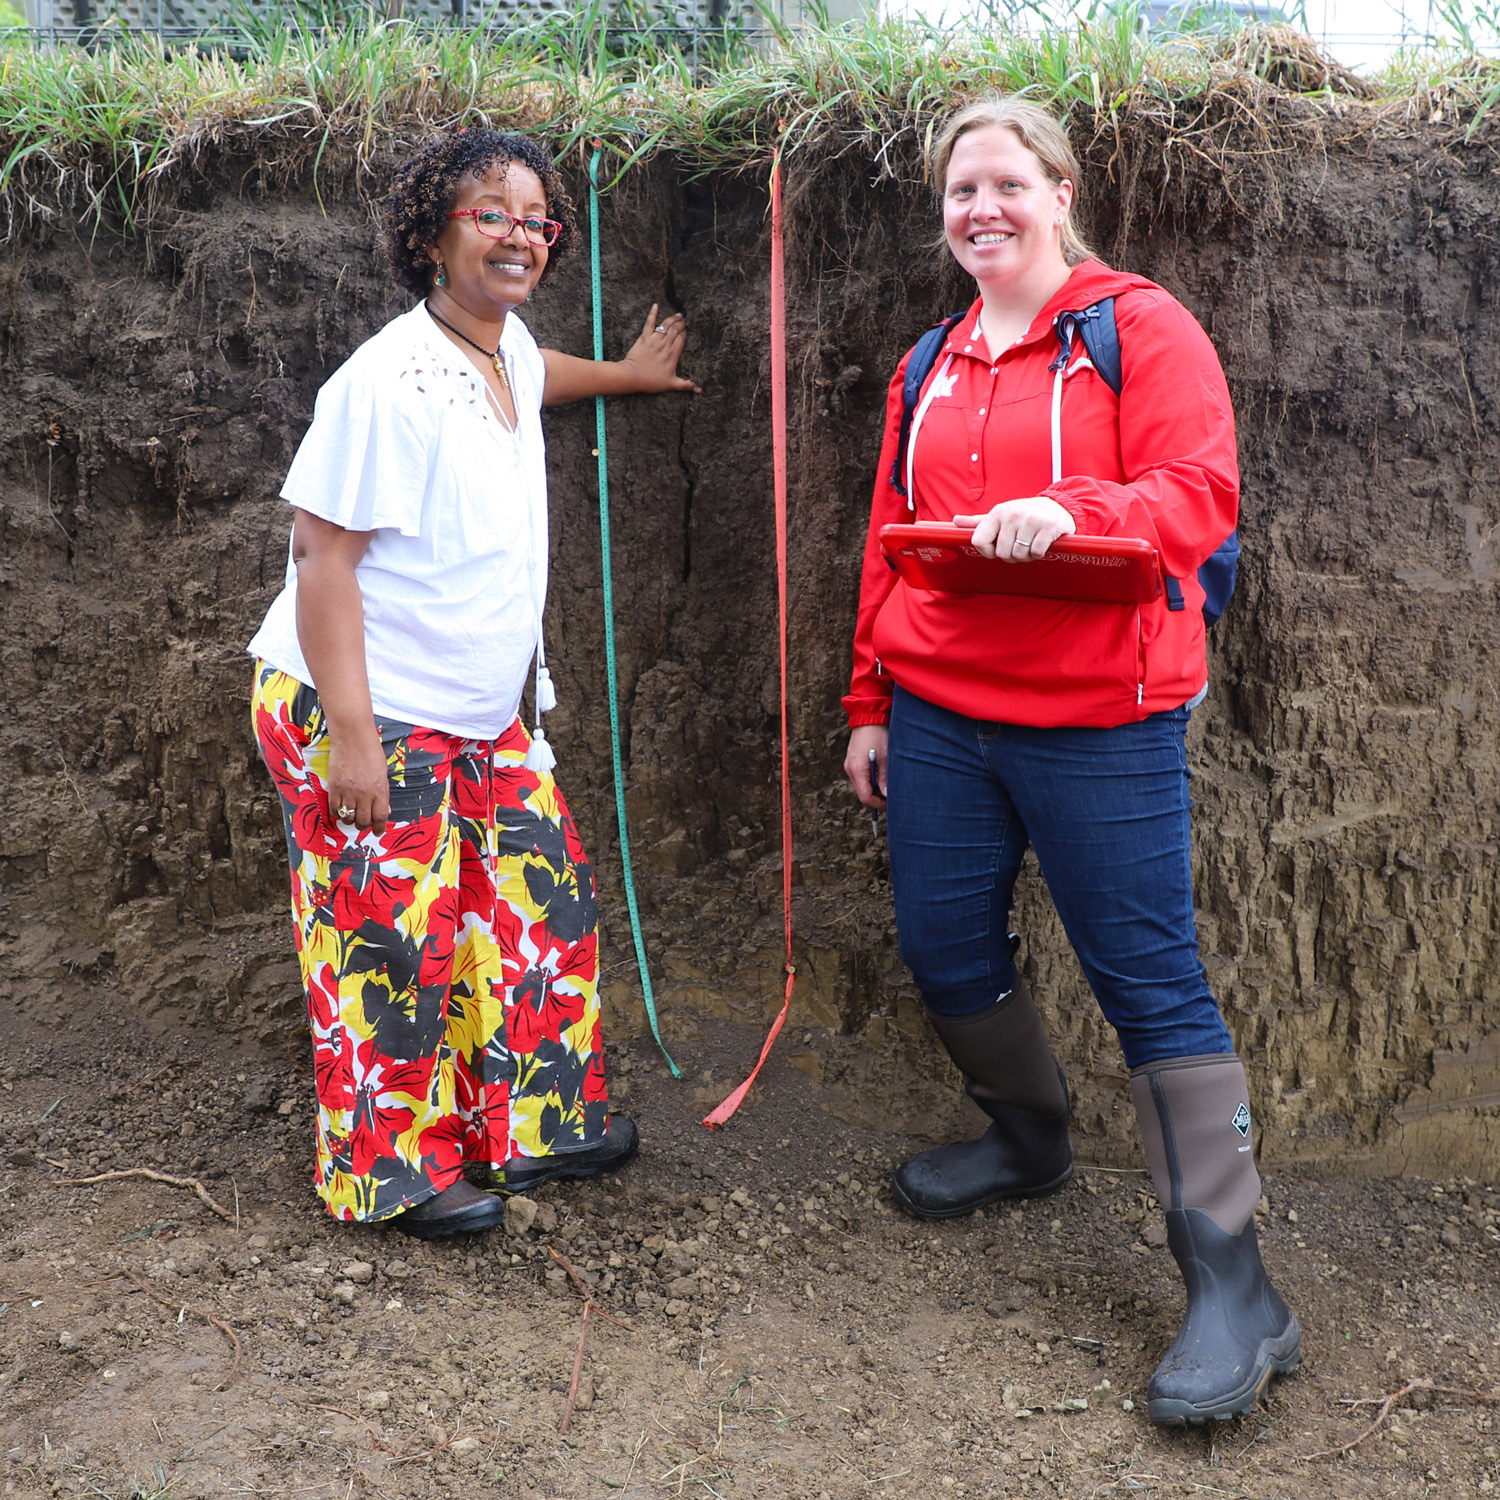 Agronomy and Horticulture department head Martha Mamo (left) and Becky Young, Agronomy and Horticulture assistant professor of practice and soil judging coach, pose in the East Campus soil pit during PLAS/SOIL 279 Soil Evaluation class.